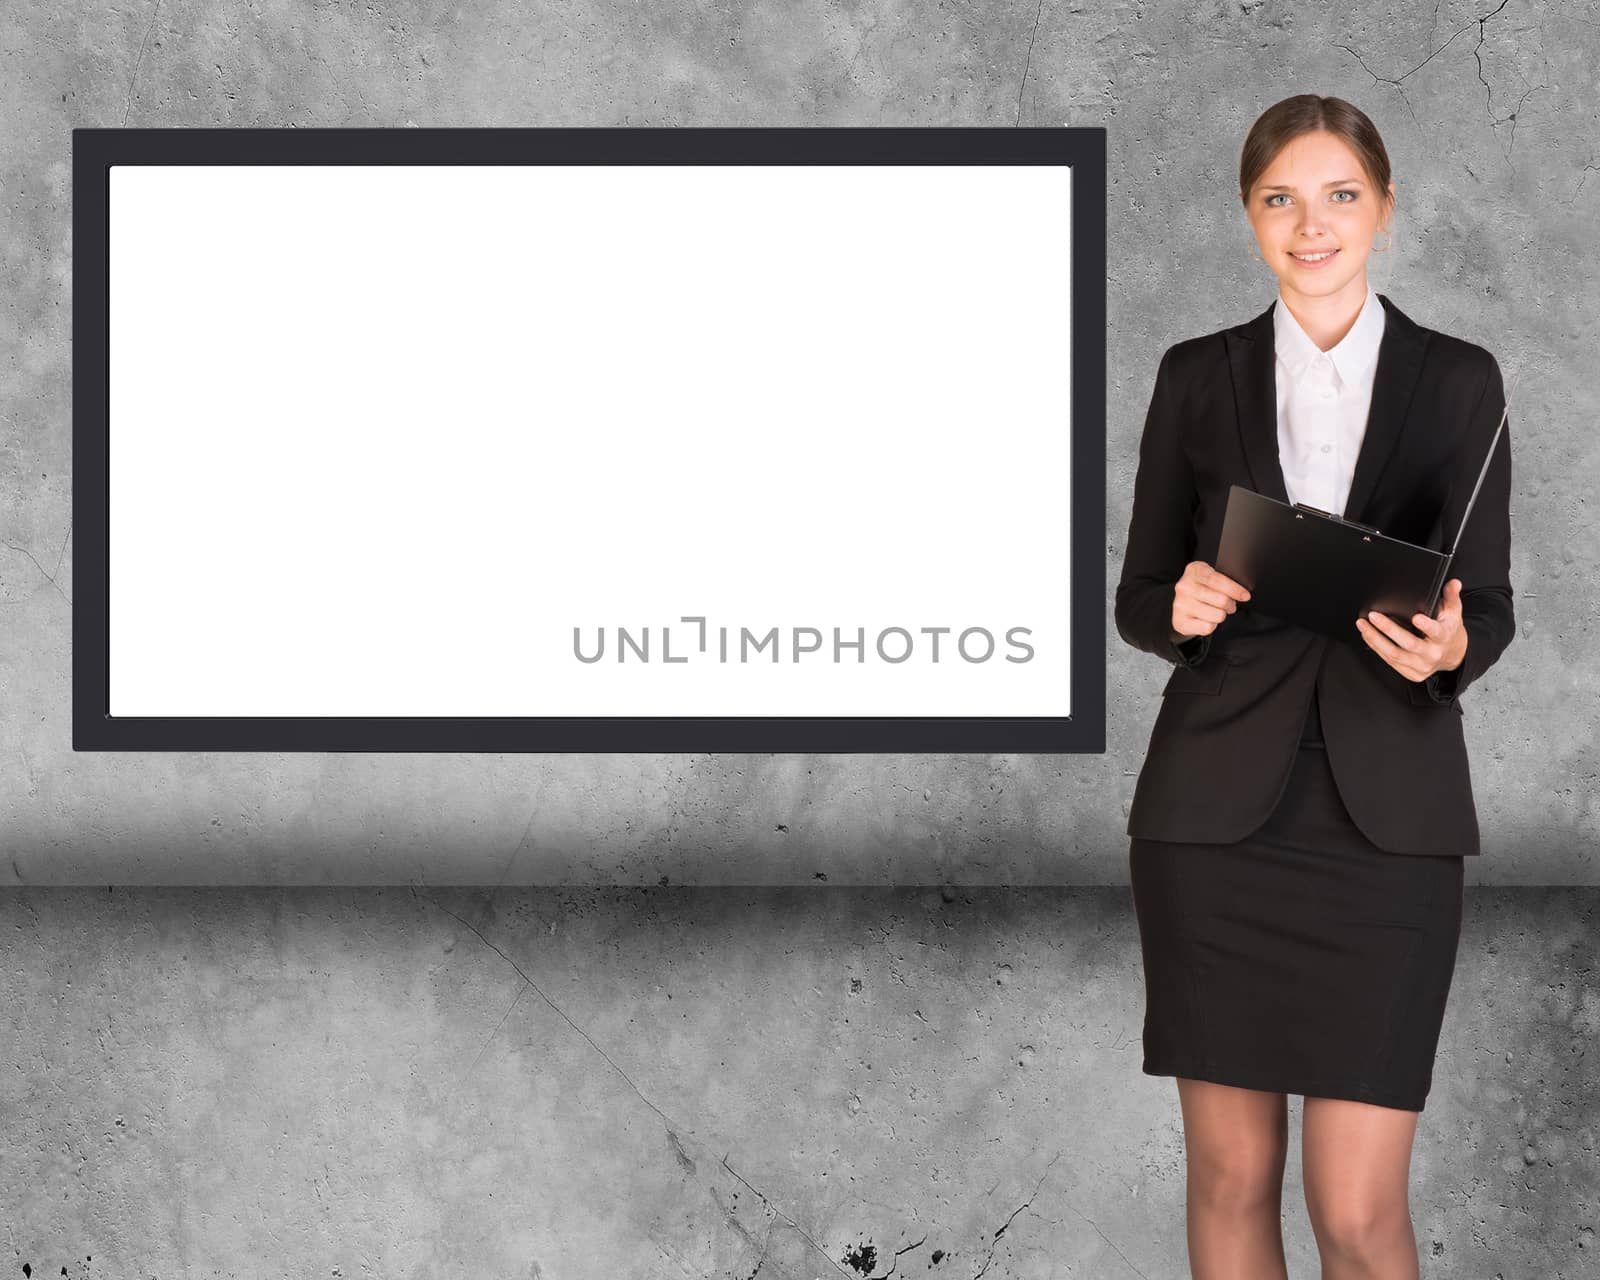 Business lady holding pen on abstract background with empty square shape place